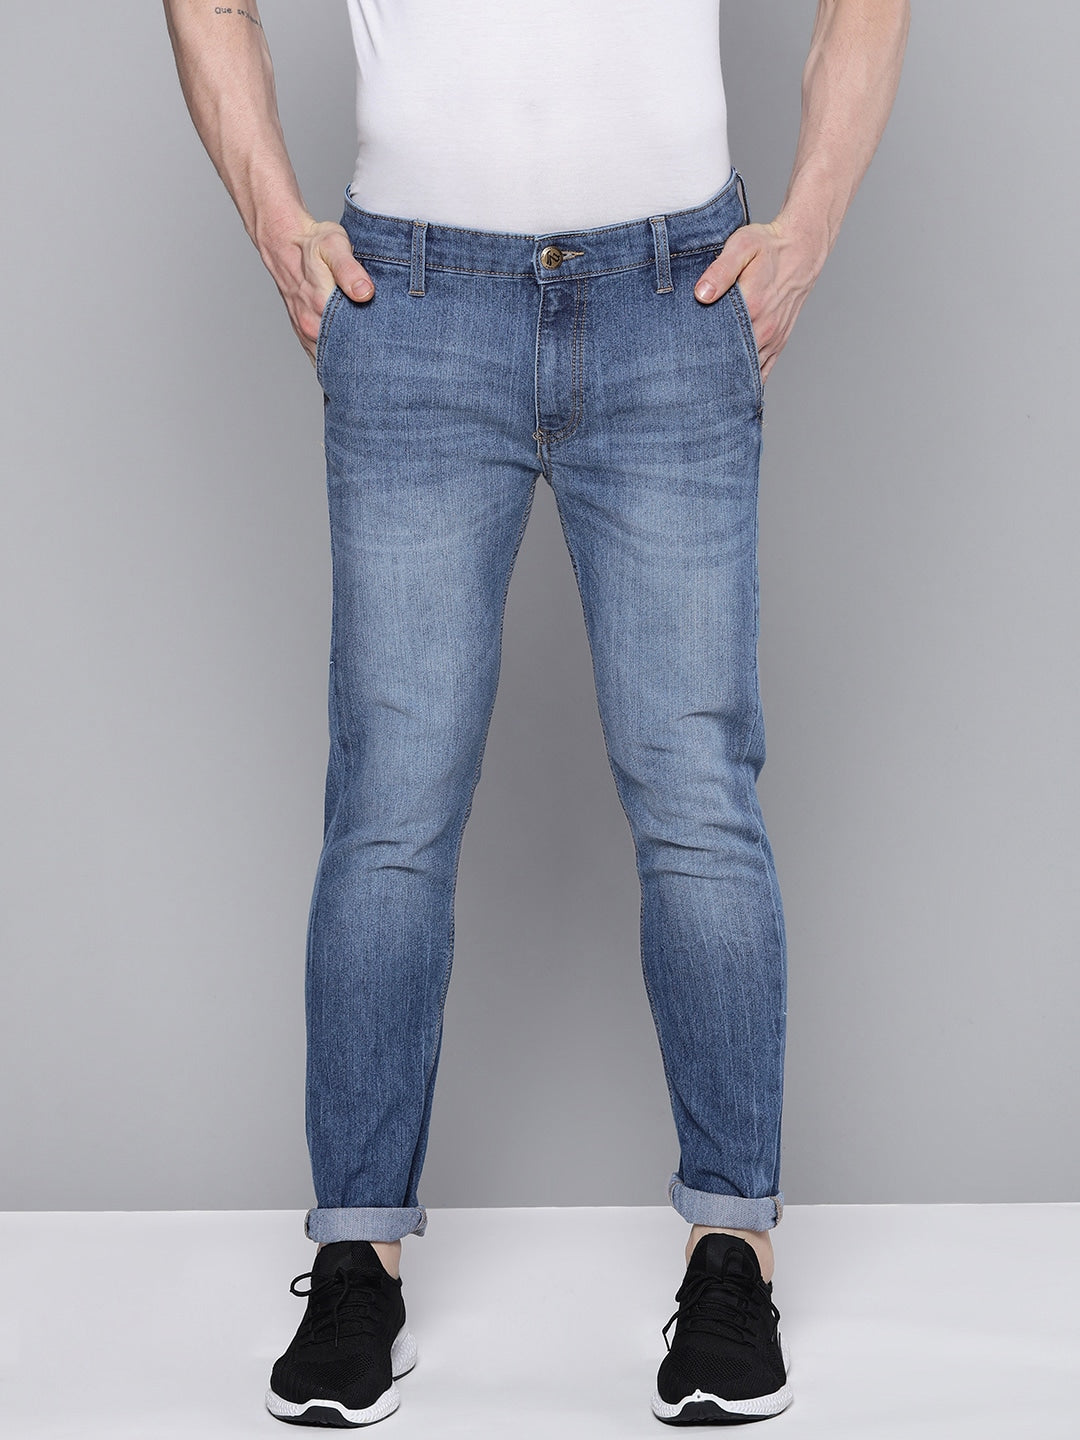 Blue Solid Jeans-28 / Blue